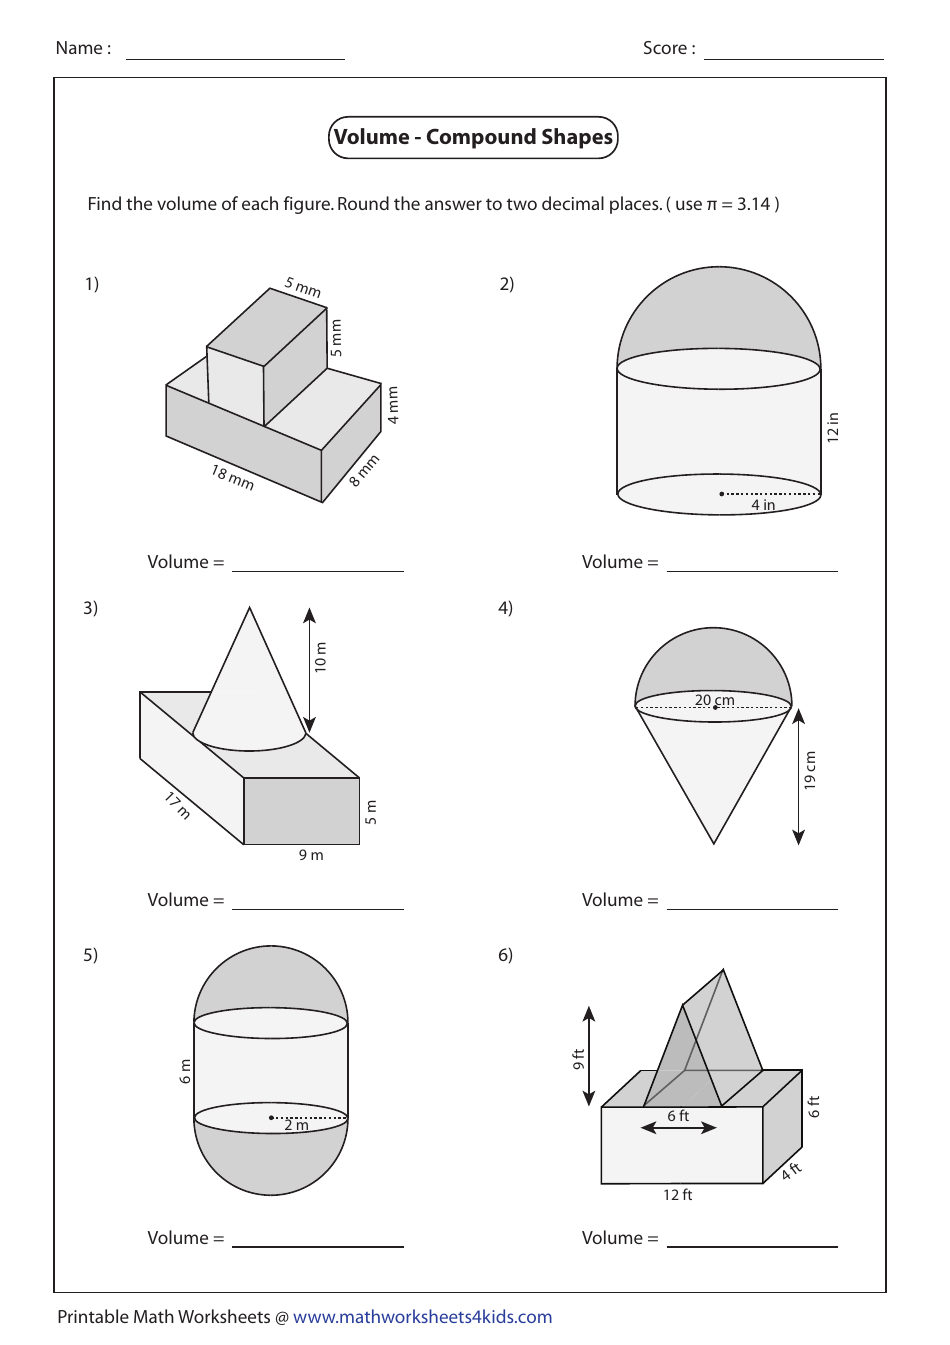 volume-compound-shapes-worksheet-with-answers-parallelepiped